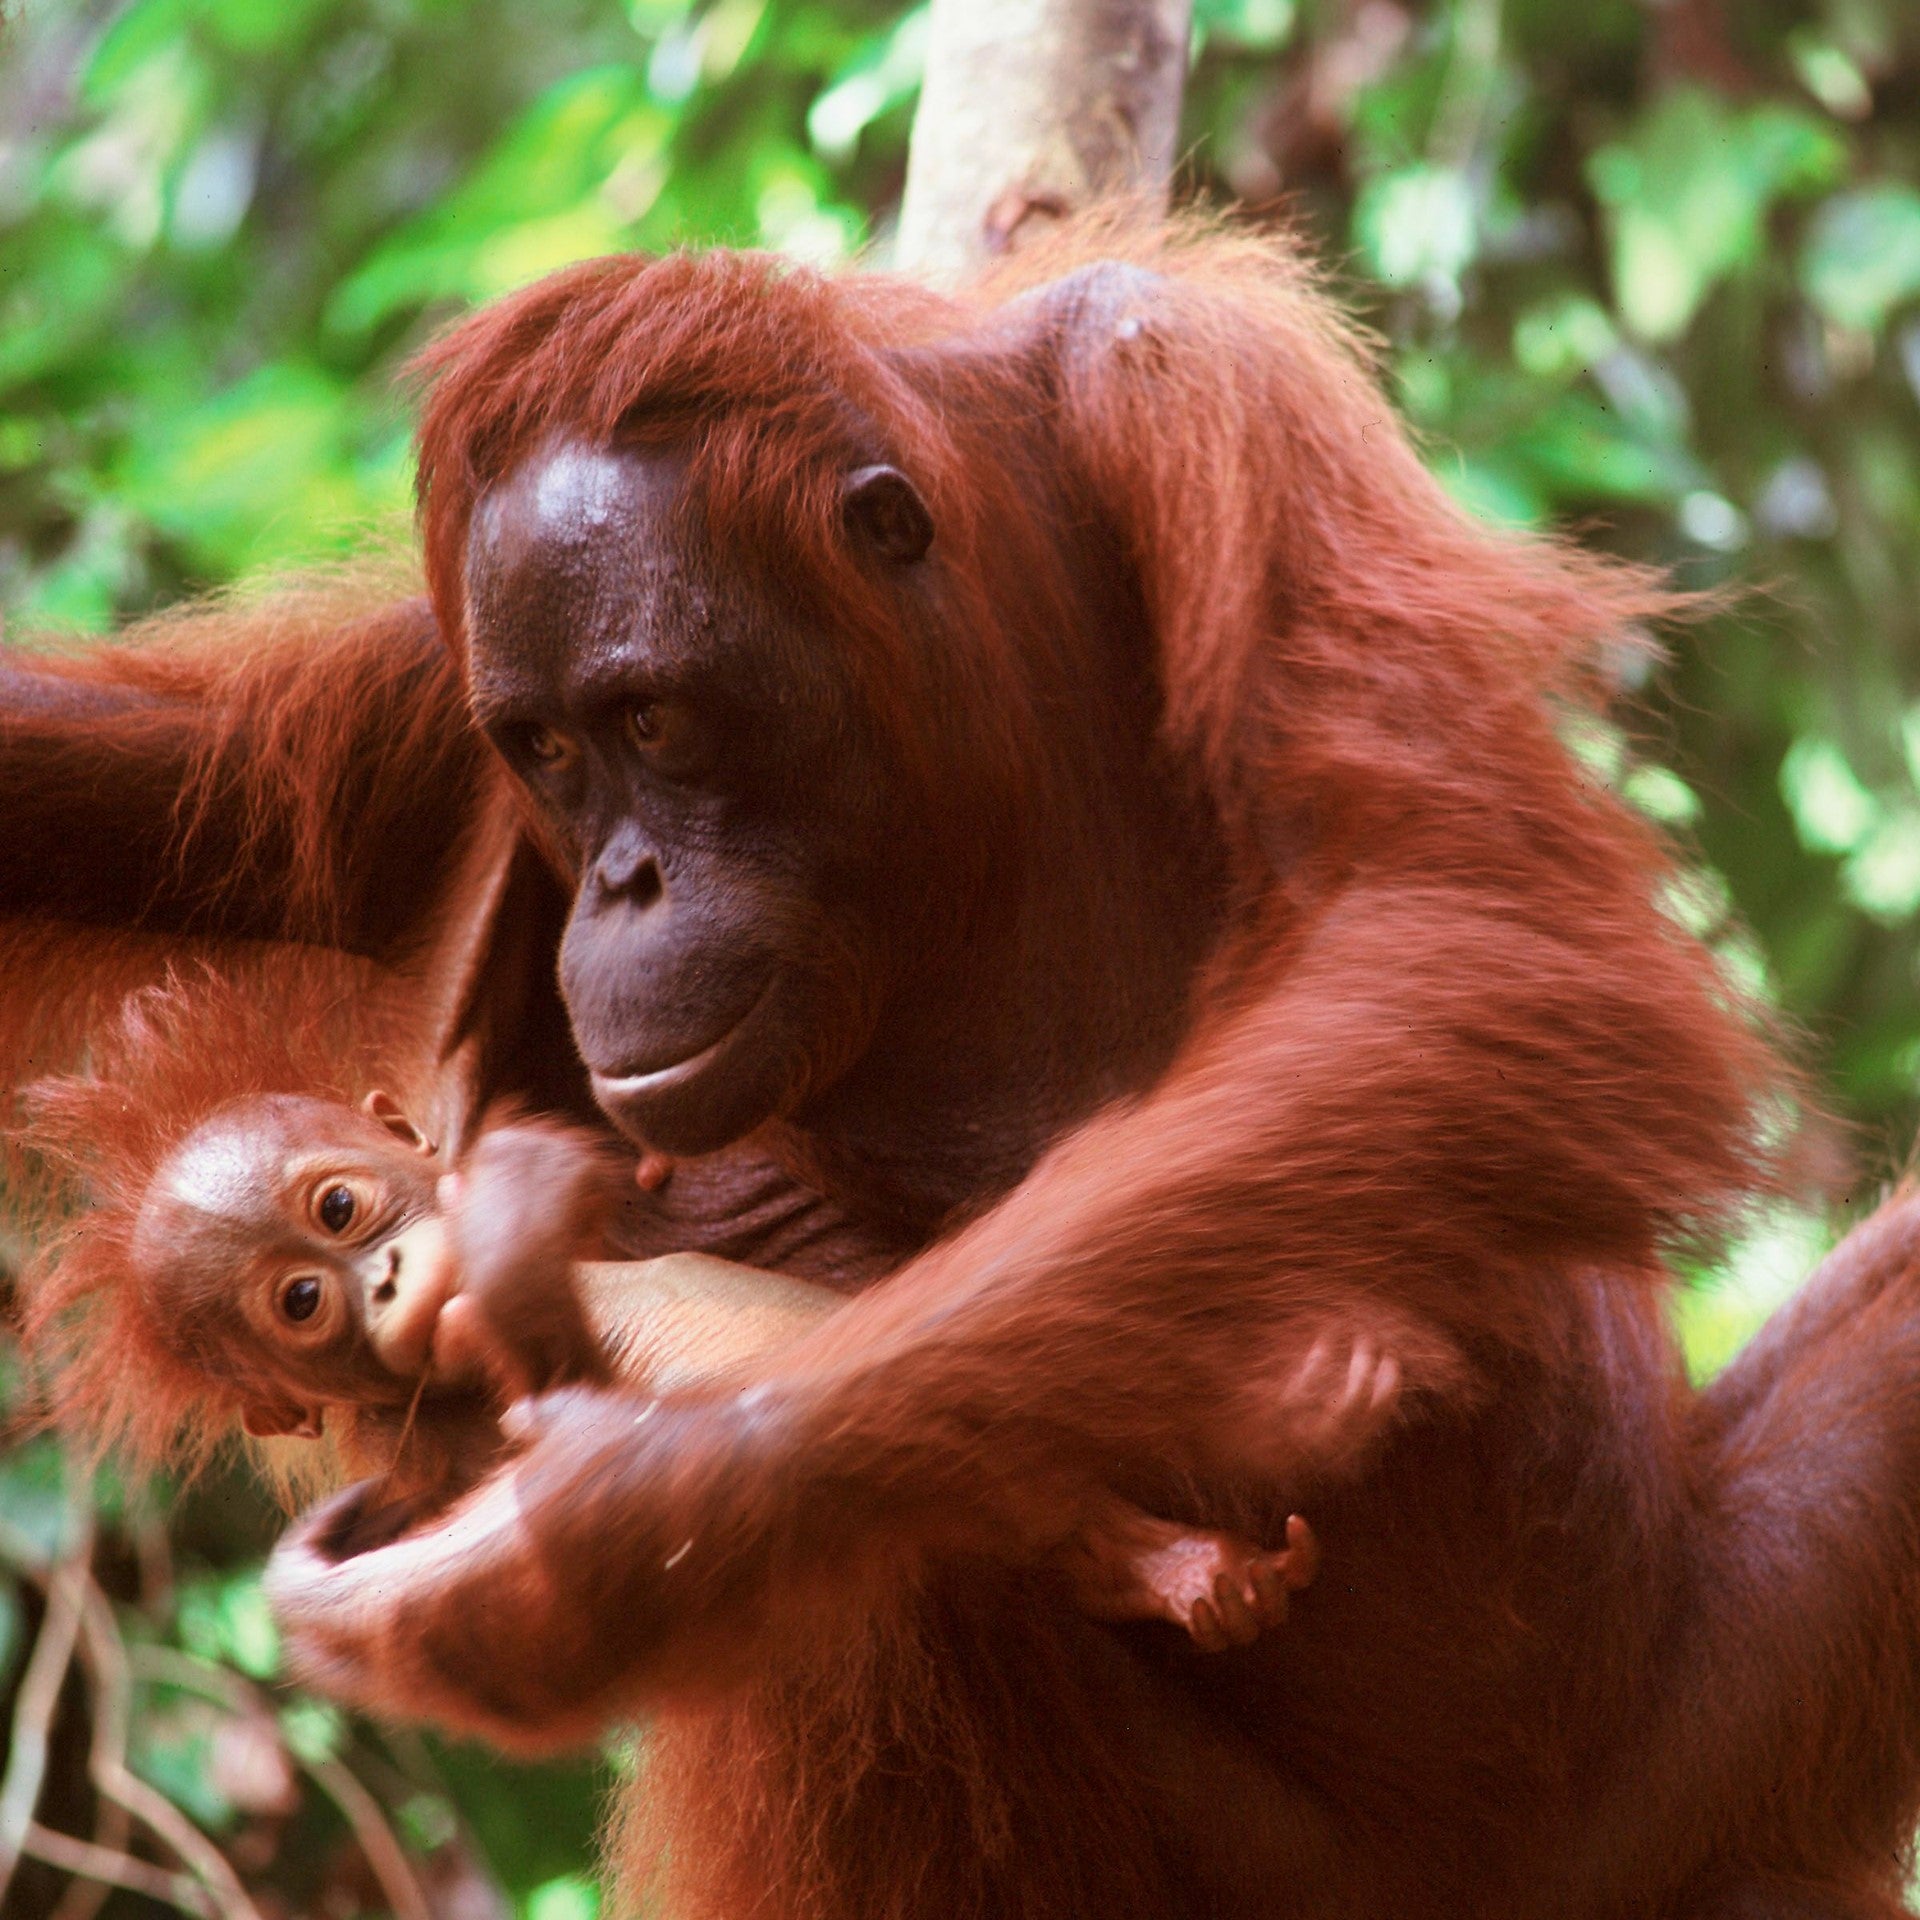 A picture of a mother orangutan and her baby